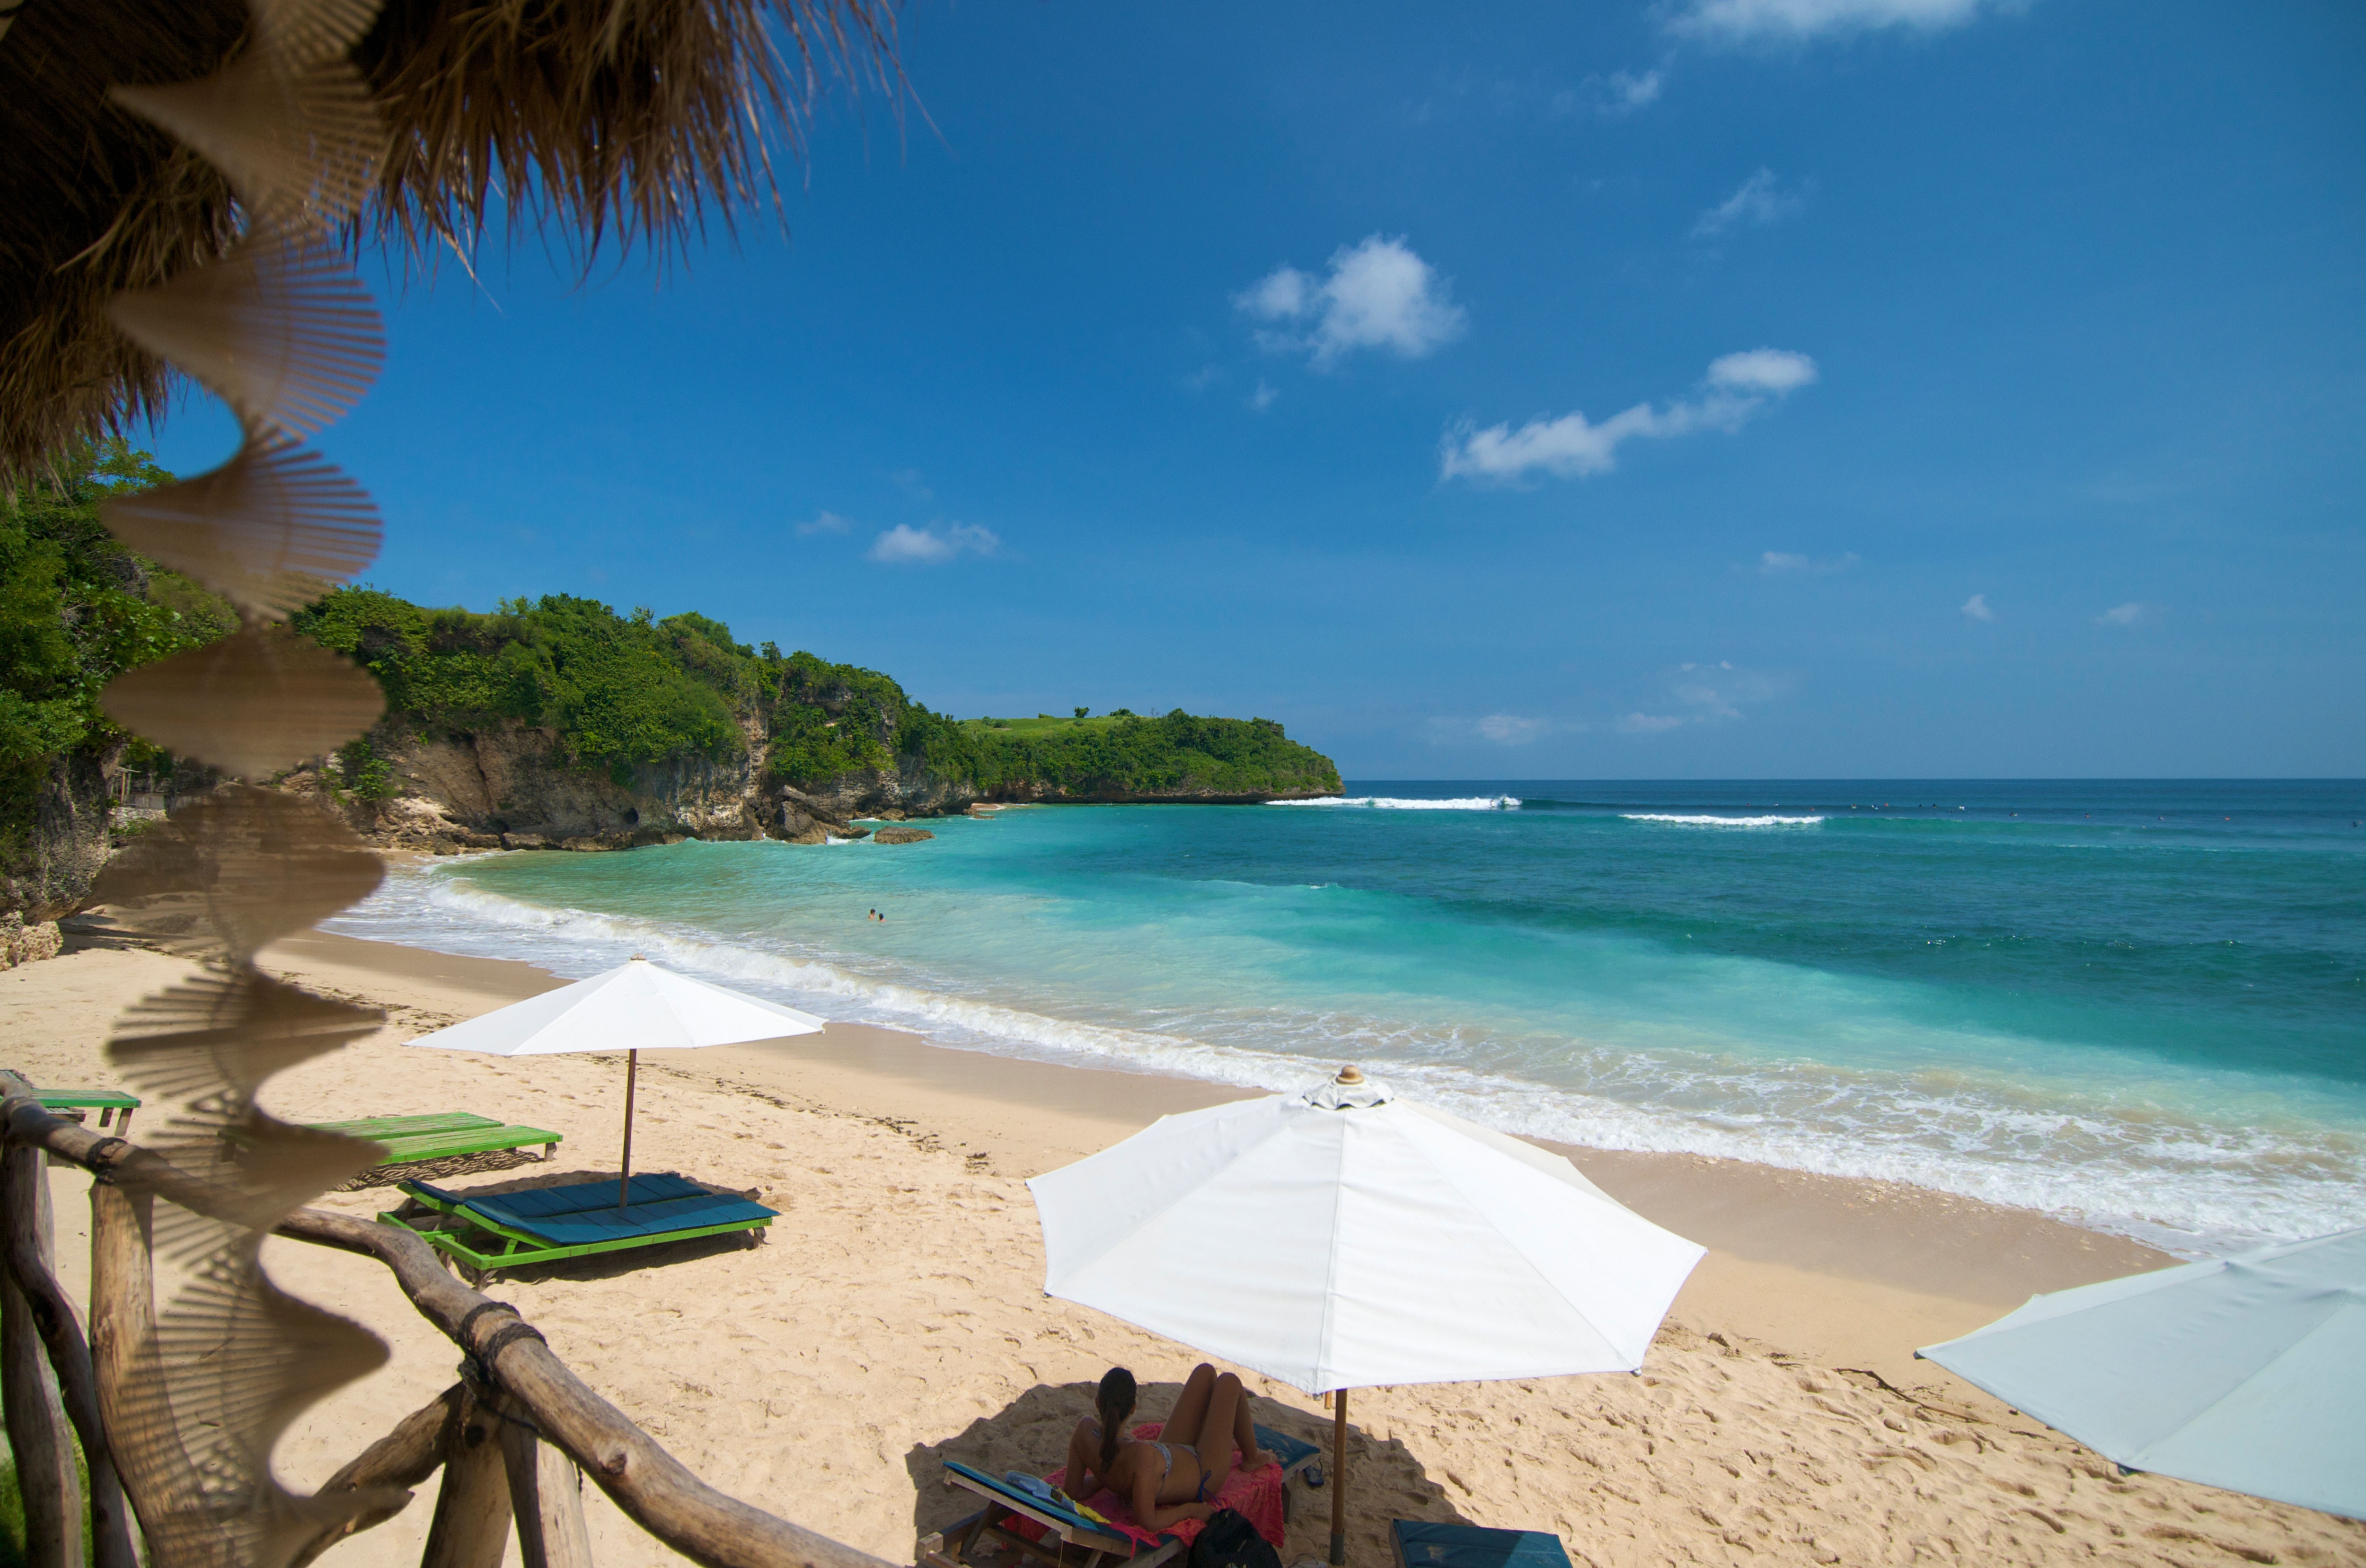 Balangan Beach - One of the Top Attractions in Bali, Indonesia - Yatra.com